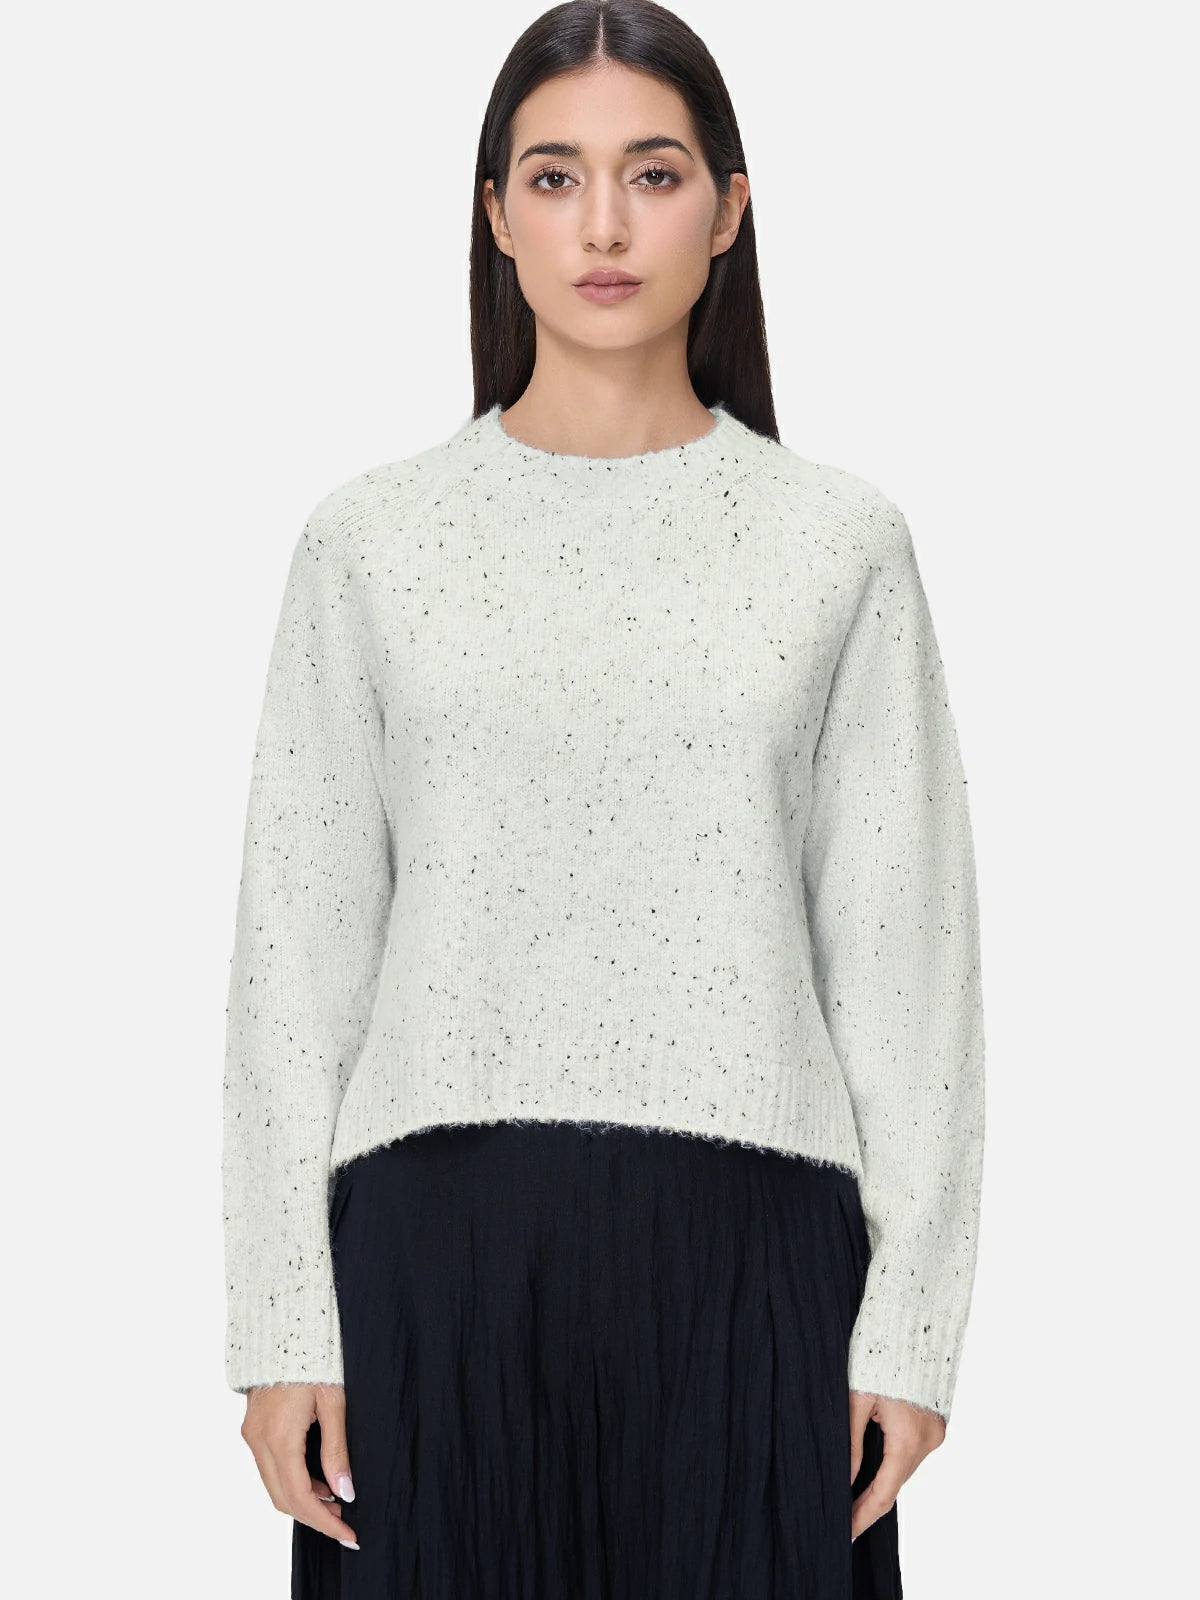 Chic White Crewneck Sweater with Black Polka Dot Details